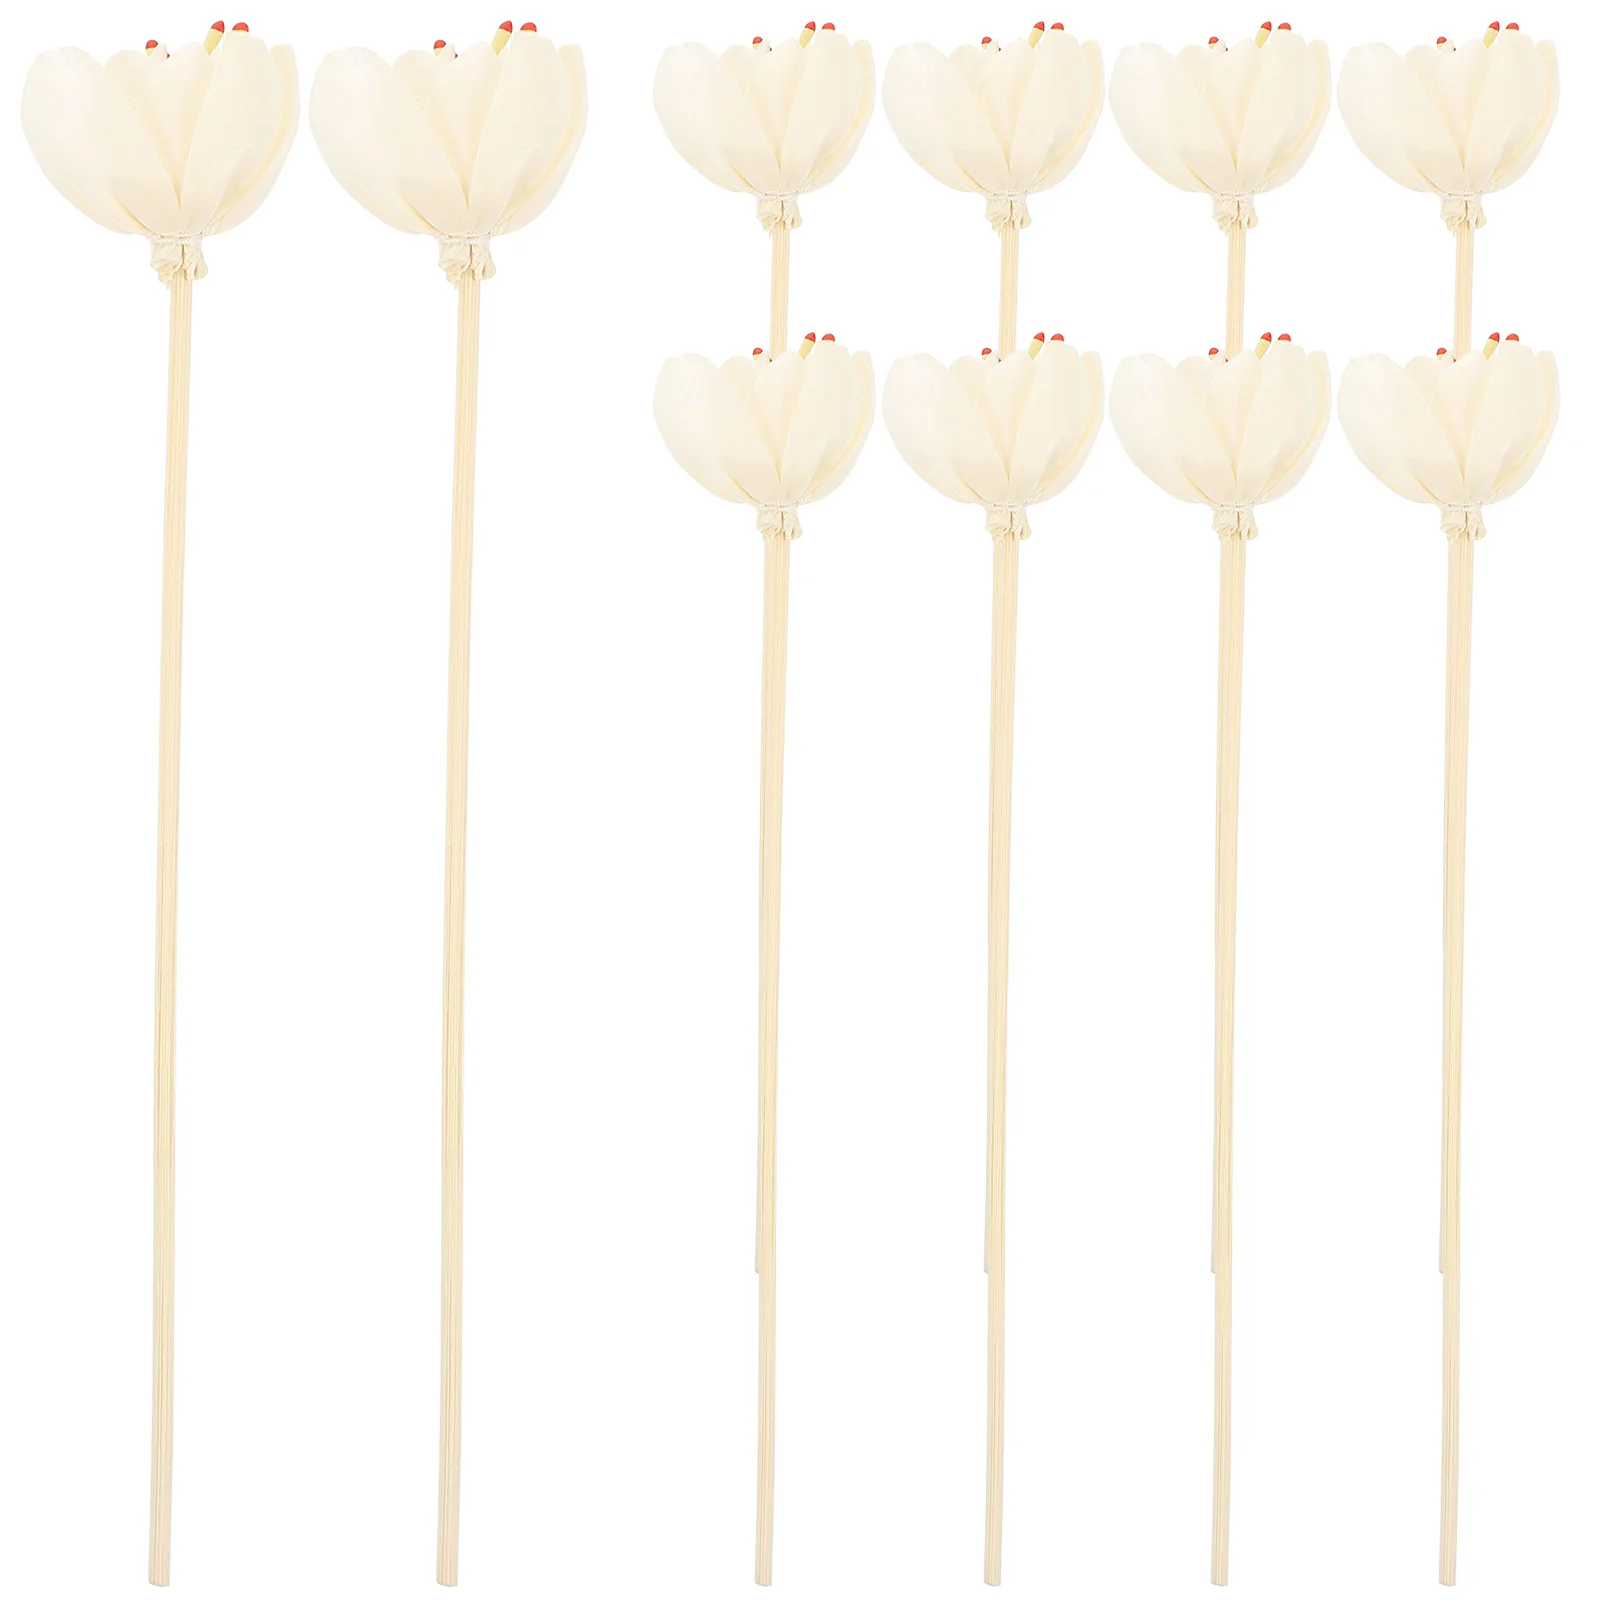 

10 Pcs Wedding Decorations Ceremony Aromatherapy Rattan Sticks Reed Diffuser Replaceable Reeds Essential Oil Diffusers Flower